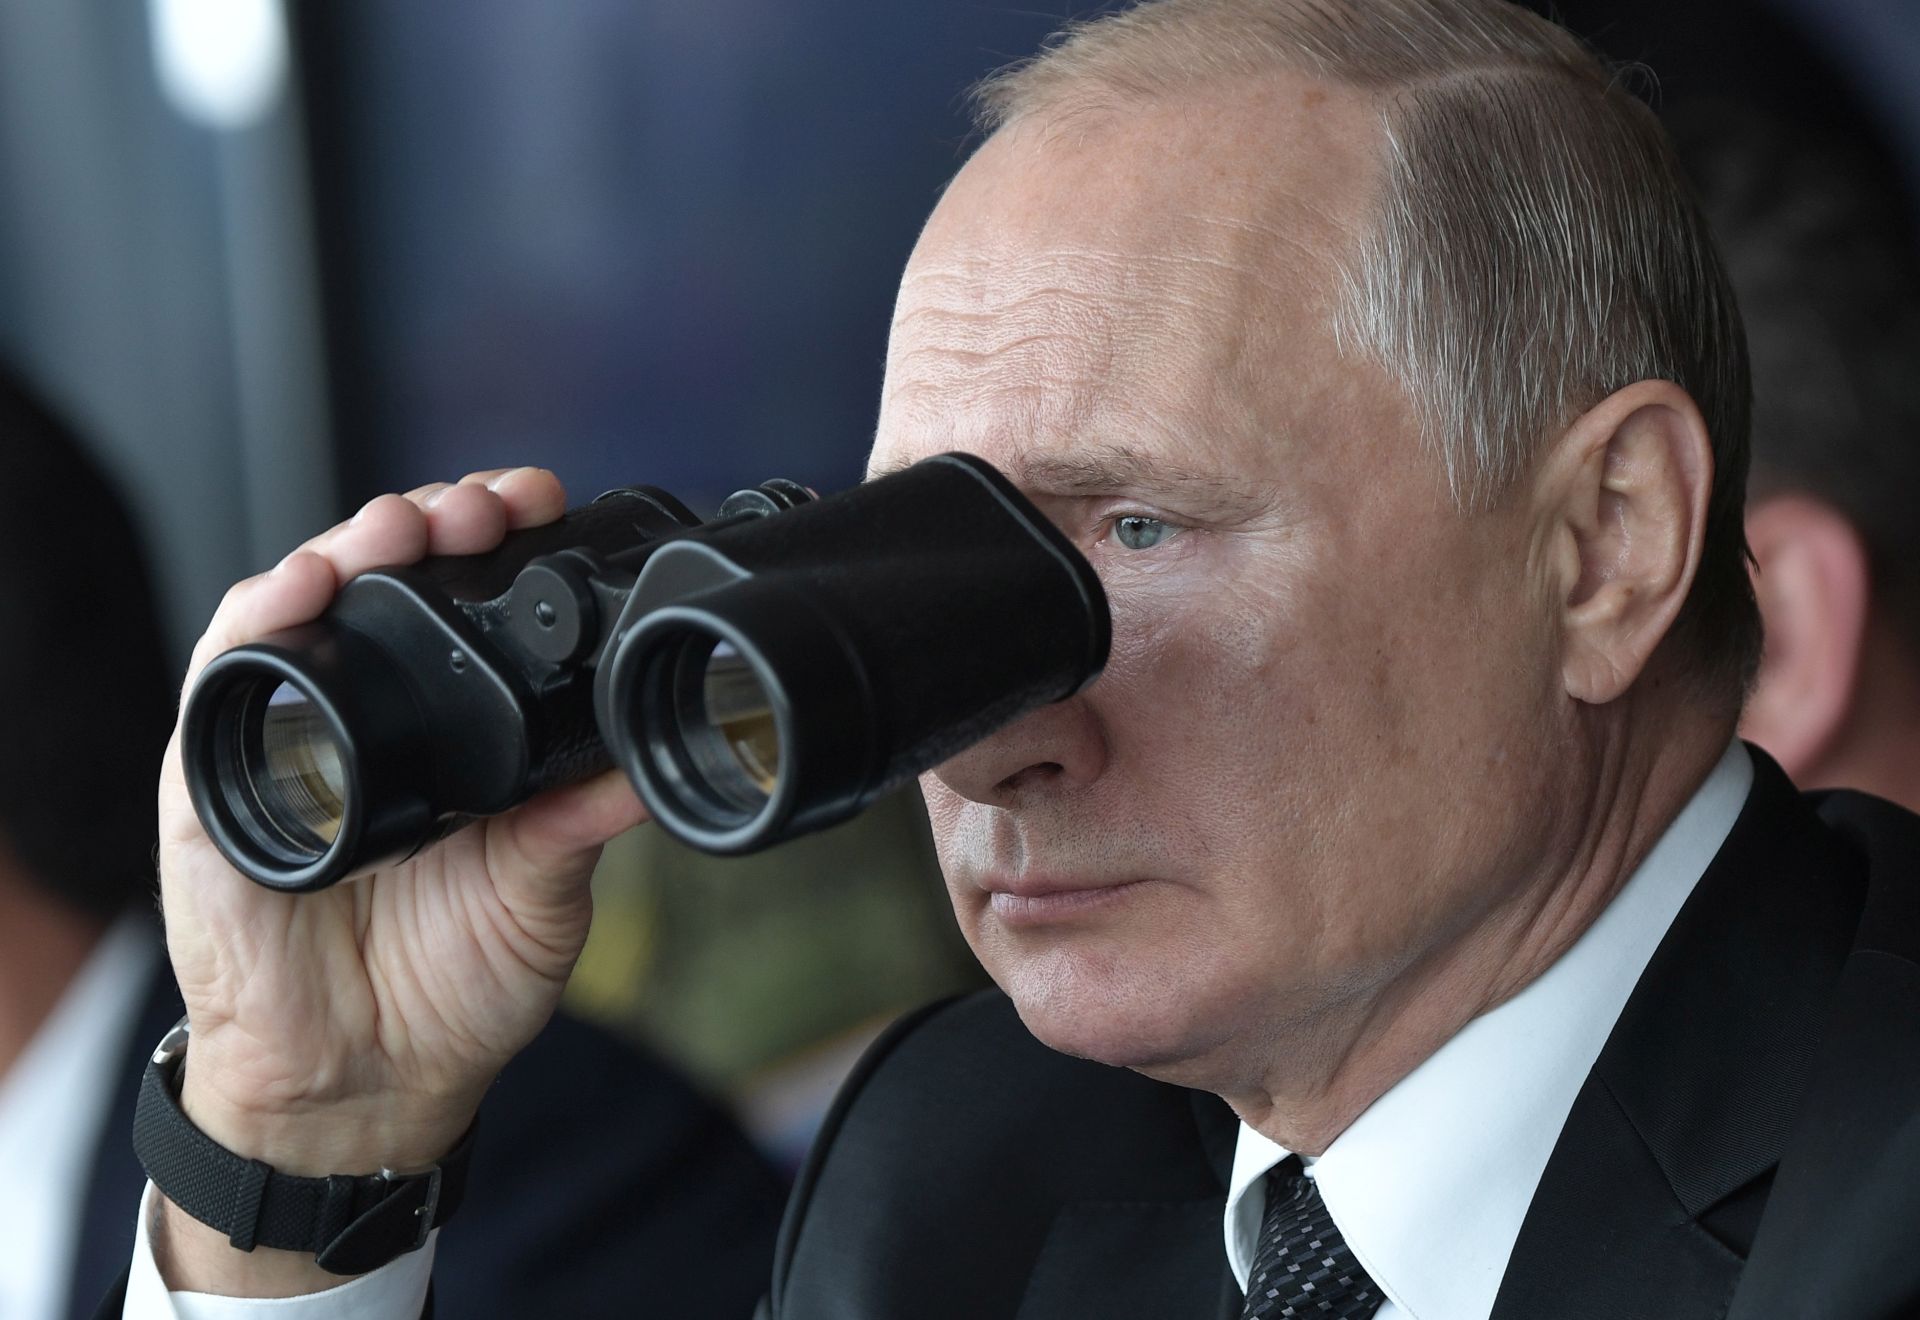 epa07855568 Russian President Vladimir Putin looks through binoculars as he watches  the main phase of the Center 2019 strategic military exercise at the Donguz test ground  outside Orenburg, Russia, 20 September 2019. The Center 2019 strategic command post exercise is held from 16 to 21 September on six training grounds of Russia and Kazakhstan. About 128 thousand military servicemen of Russia, China, Pakistan, Kyrgyzstan, Kazakhstan, India, Tajikistan and Uzbekistan, more than 20 thousand units of weapons, about 600 aircrafts and 15 war ships take part in the exercises.  EPA/ALEXEY NIKOLSKY/SPUTNIK/KREMLIN / POOL MANDATORY CREDIT